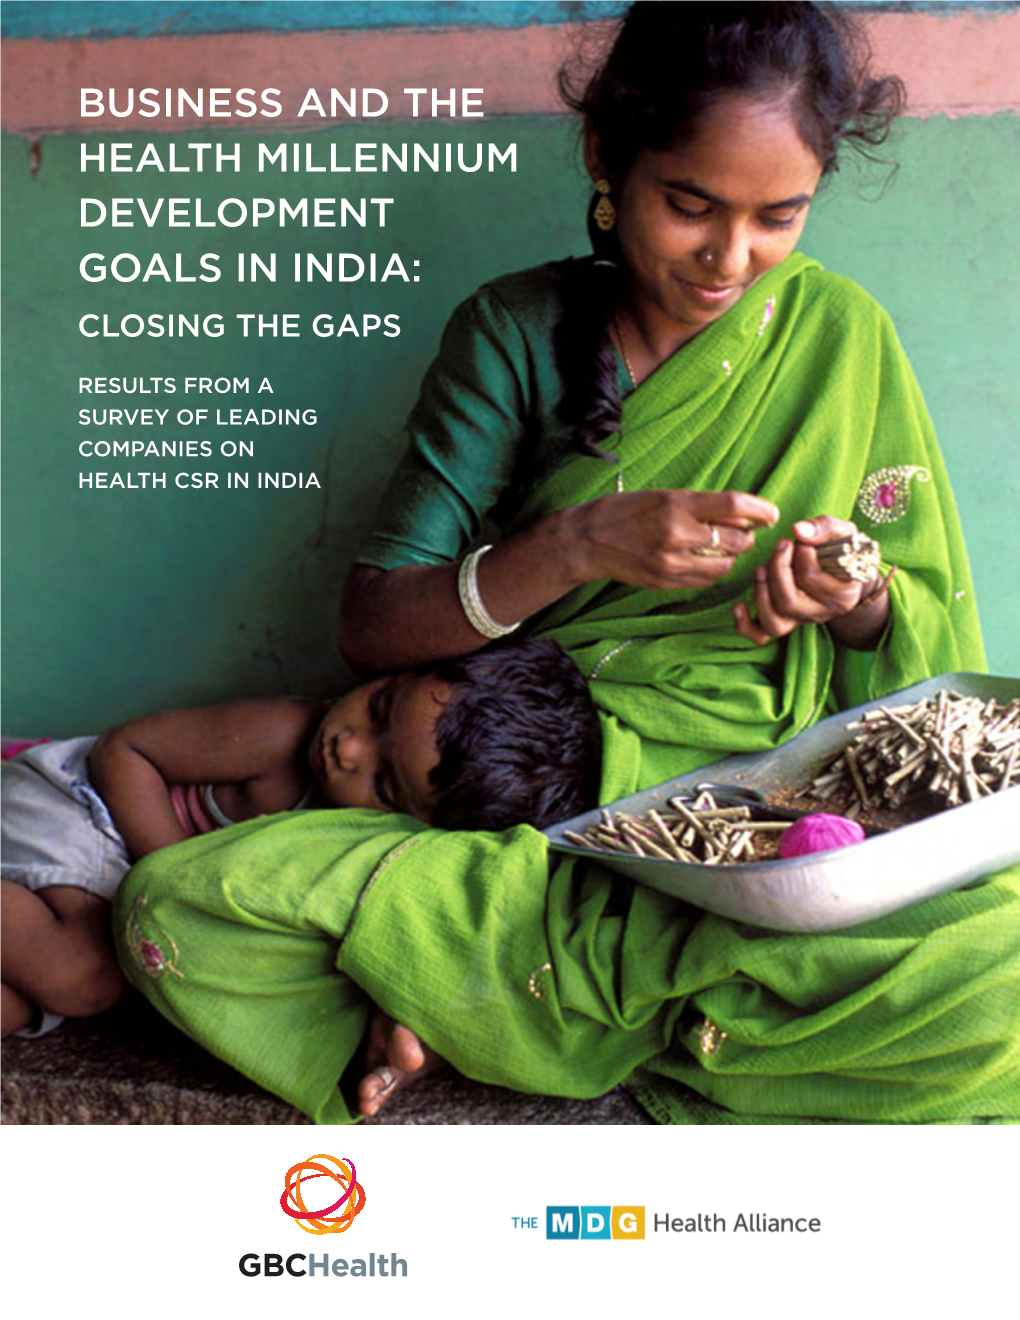 Business and the Health Millennium Development Goals in India: Closing the Gaps